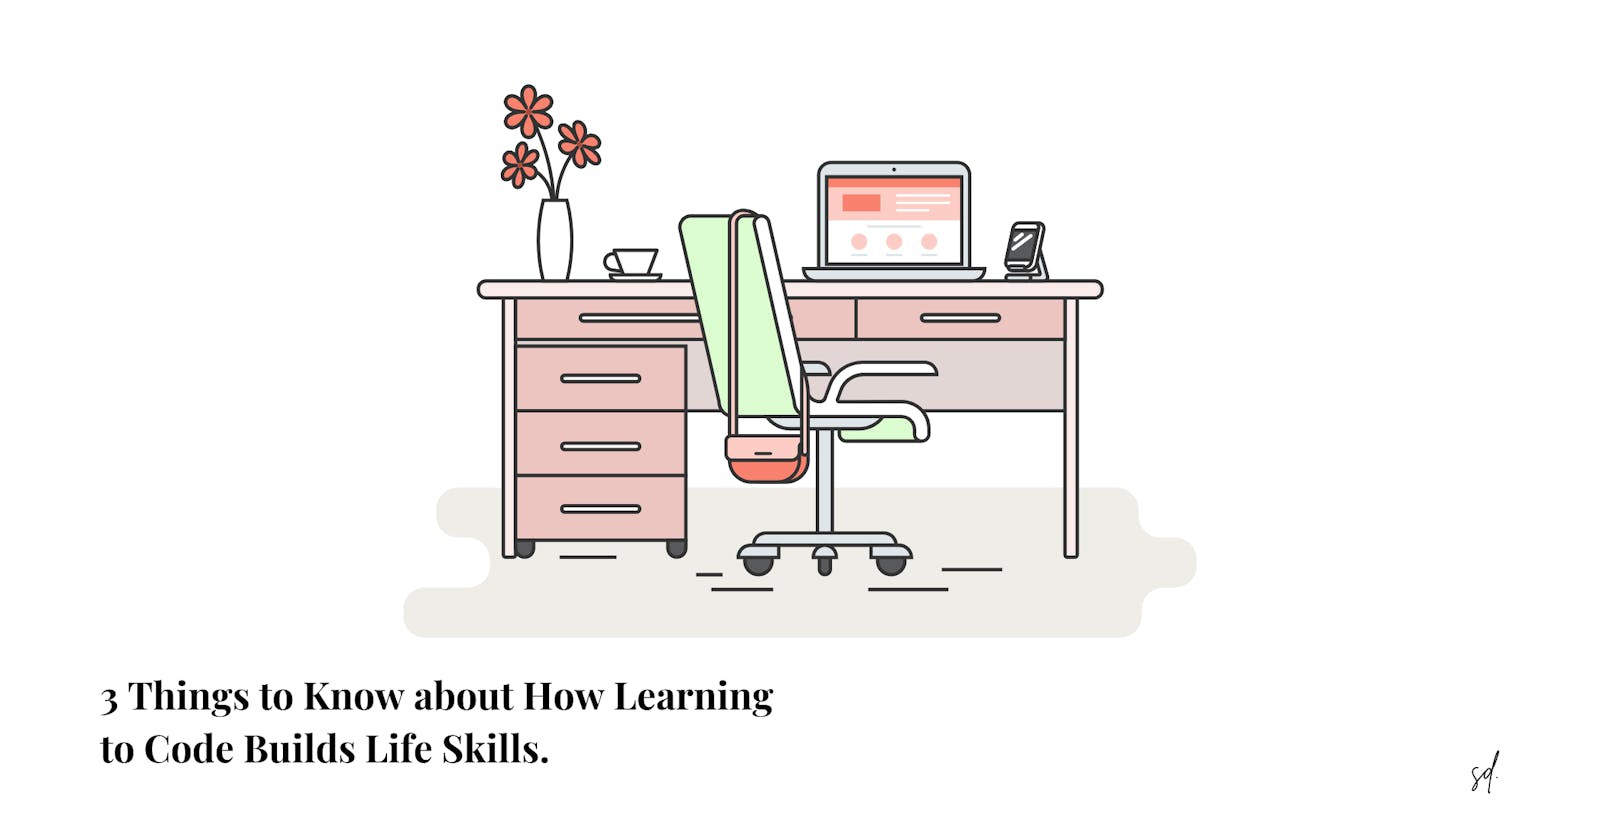 3 Things to Know about How Learning to Code Builds Life Skills